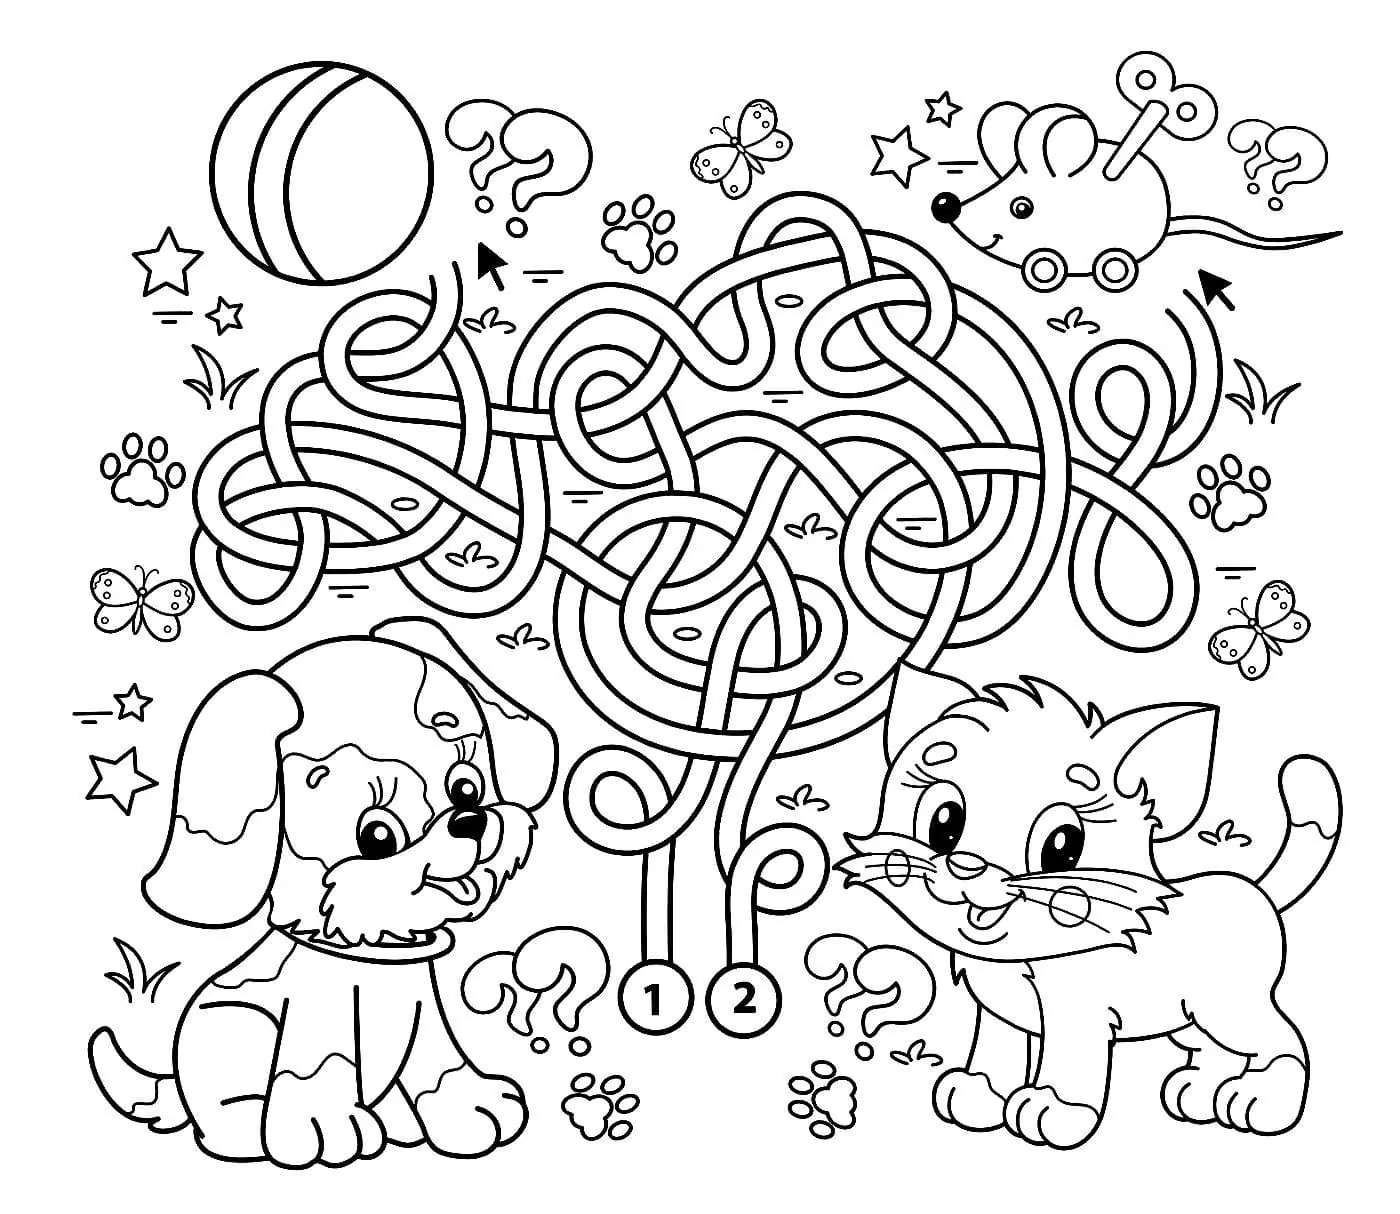 Dog and Cat Maze